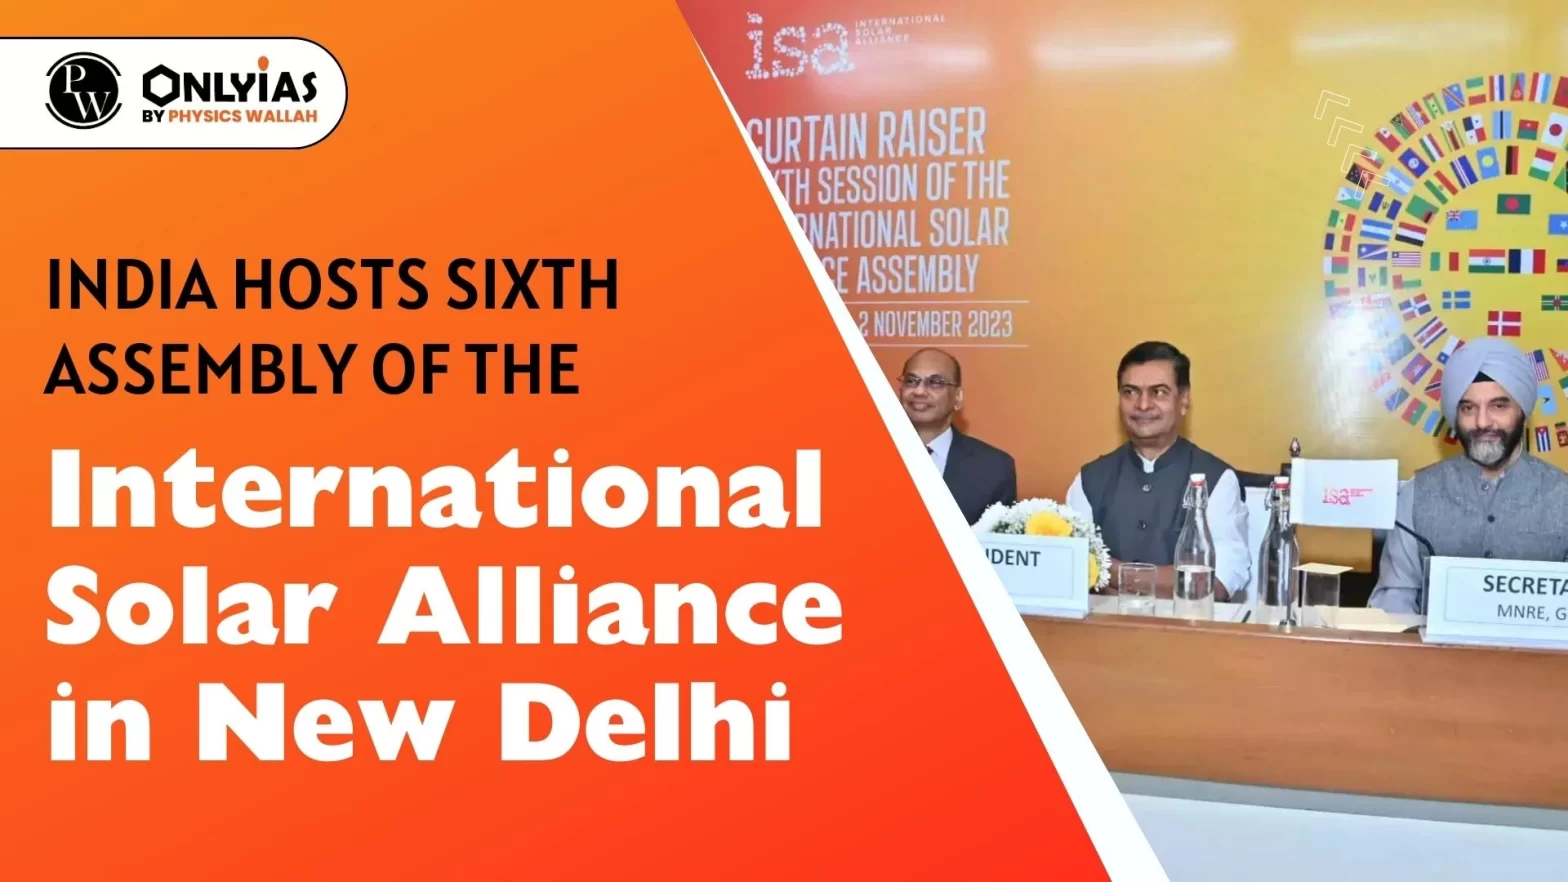 India Hosts Sixth Assembly of the International Solar Alliance in New Delhi